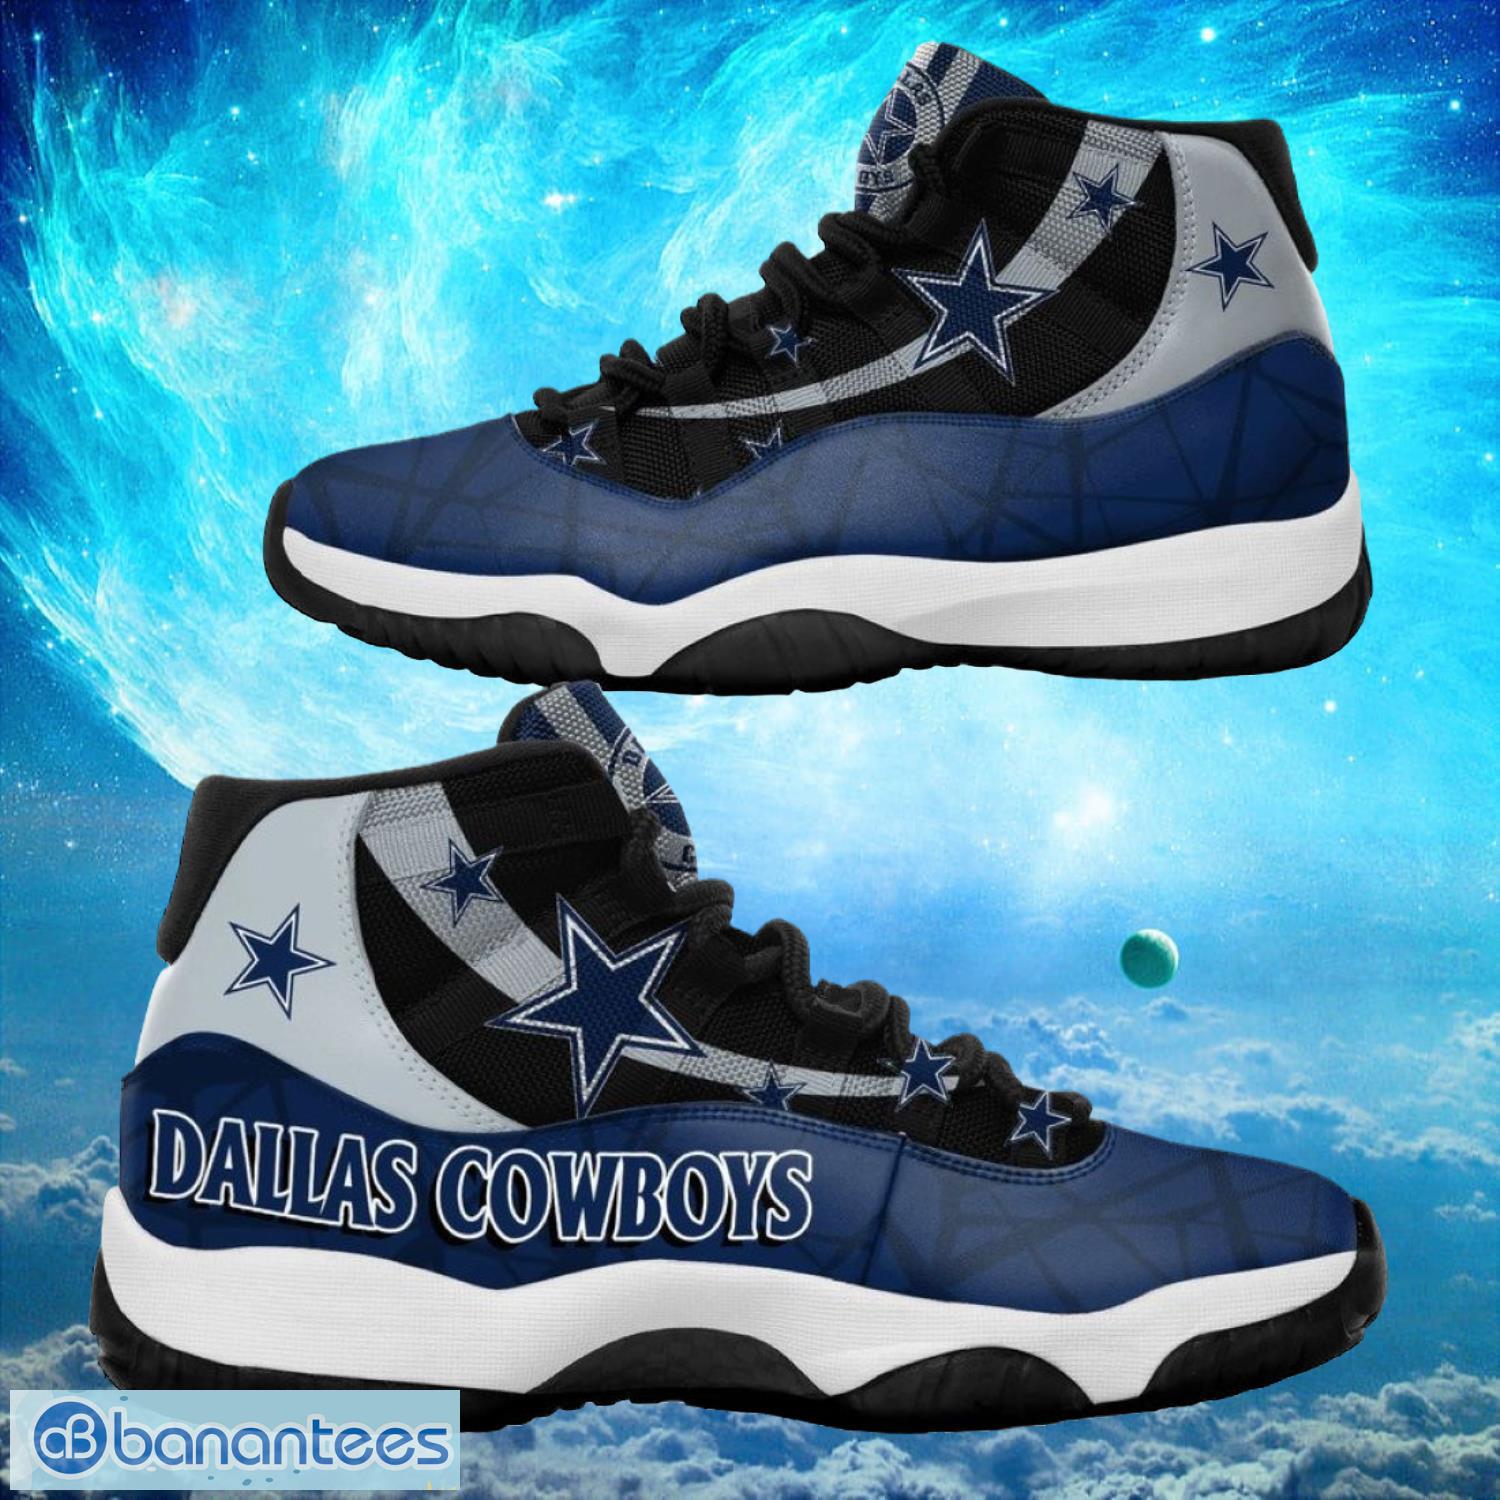 Dallas Cowboys NFL Air Jordan 11 Sneakers Shoes Gift For Fans Product Photo 1